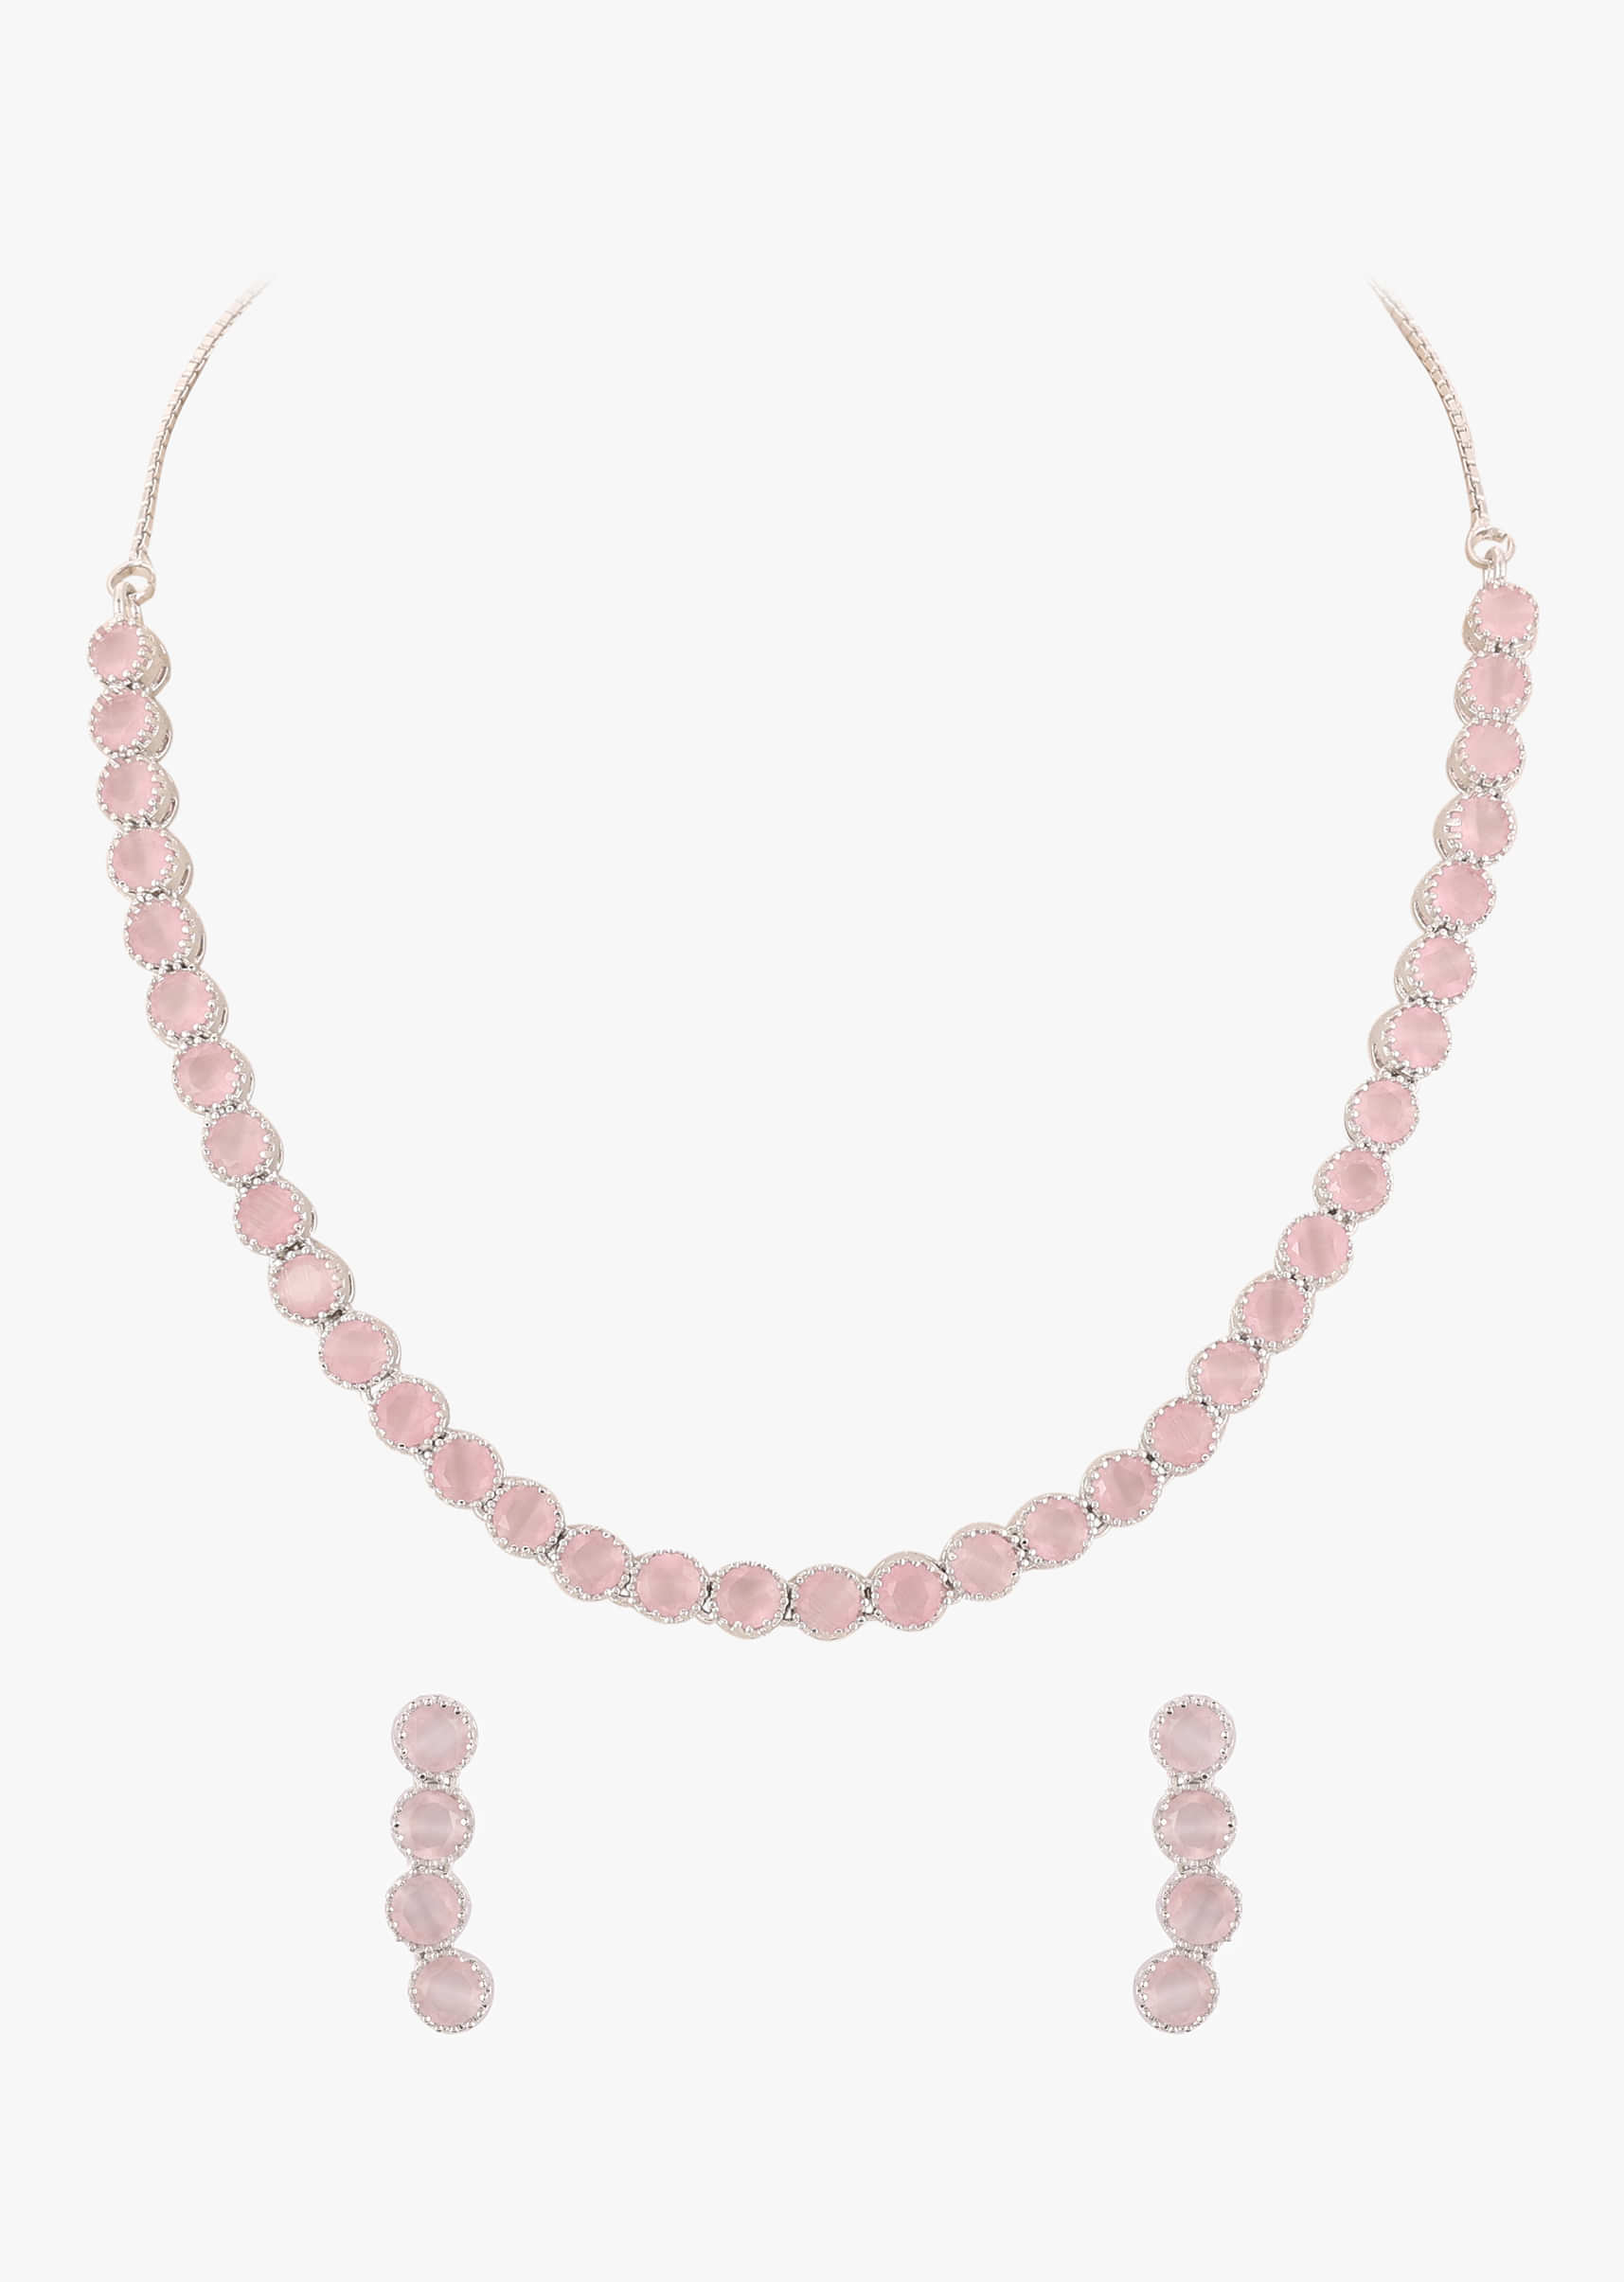 Silver Plated Diamond Necklace Set With Pink Stones